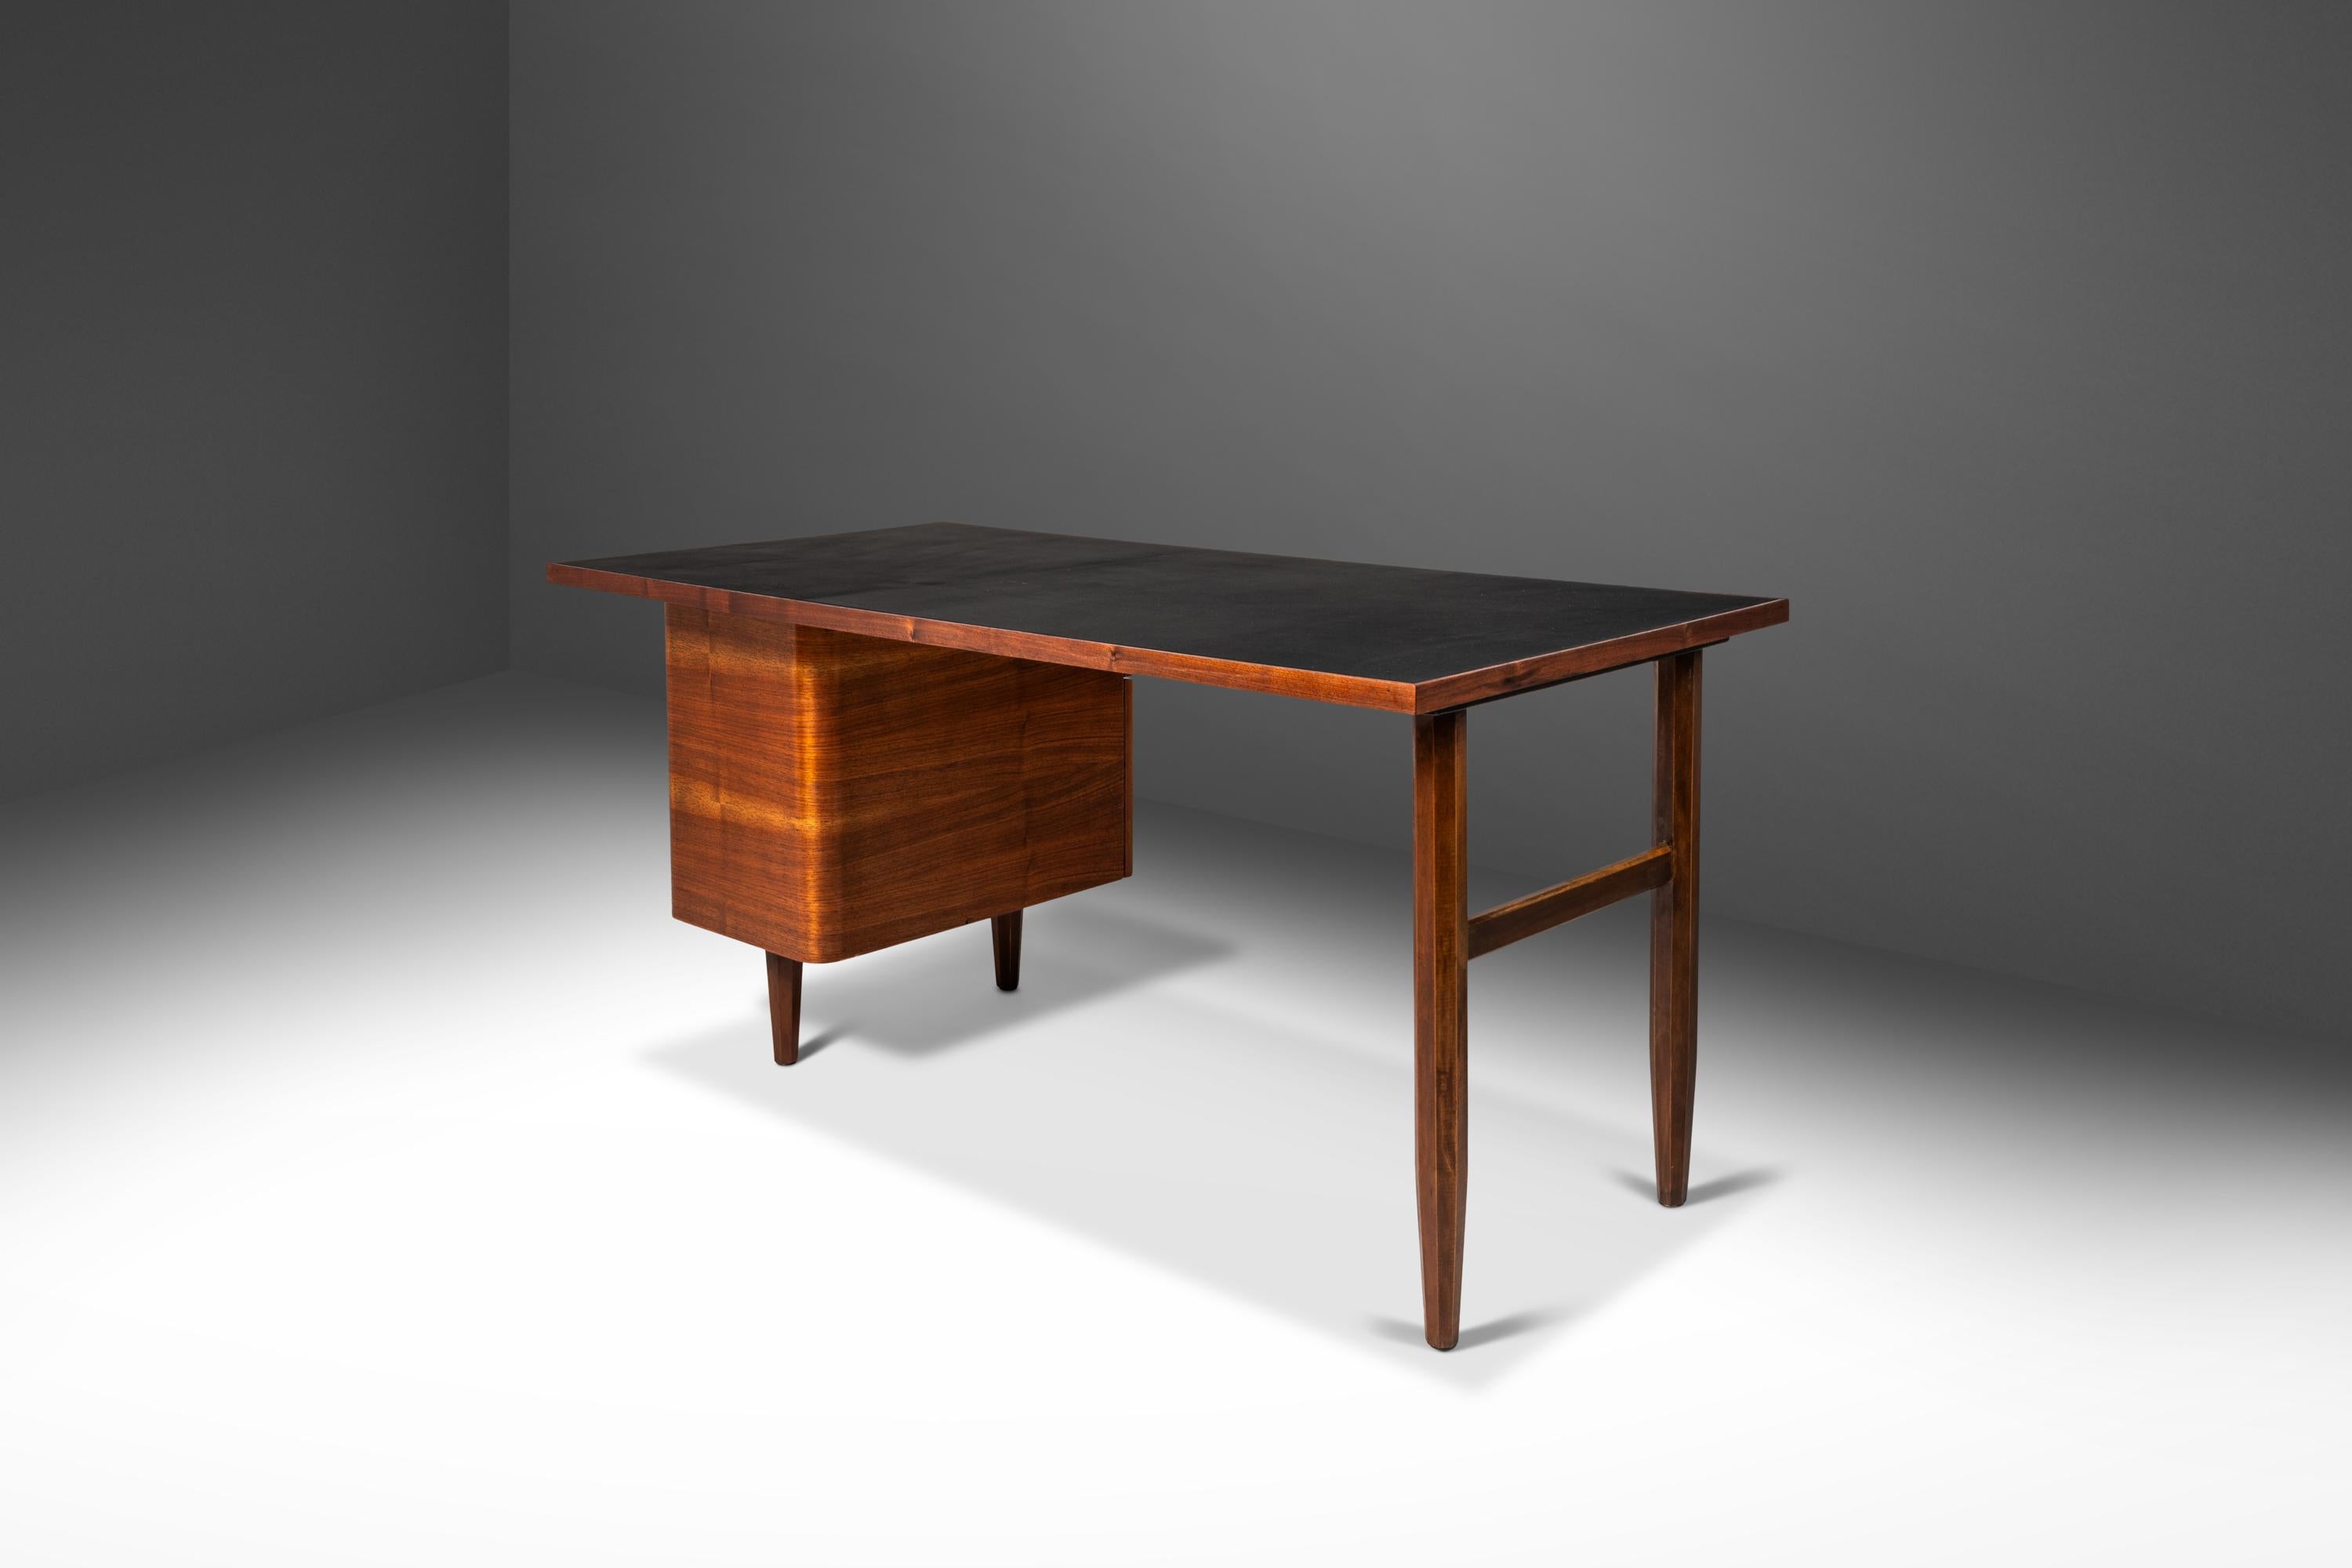 Restored Mid-Century Modern Writers Desk in Walnut with Leather Top, USA, 1960's For Sale 4